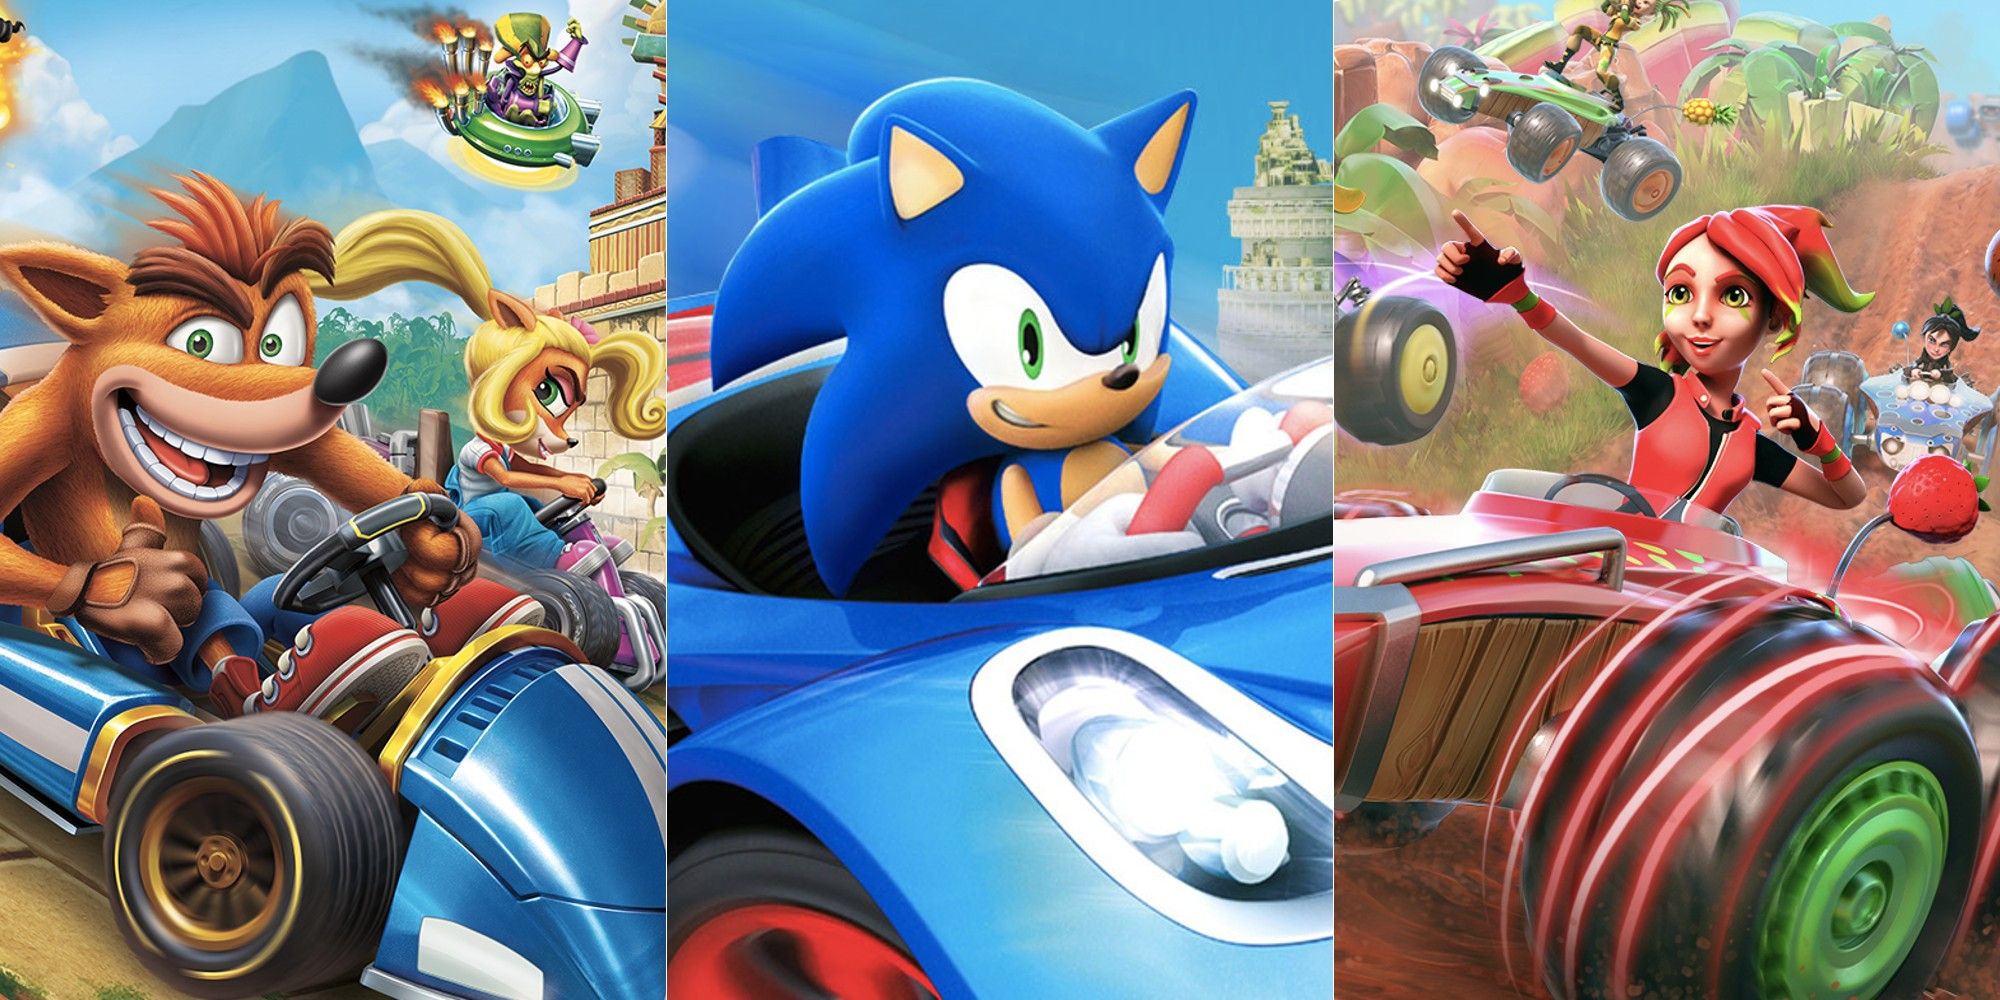 Crash Bandicoot, Sonic, and a pink-clad Fruit Racer driving race karts.